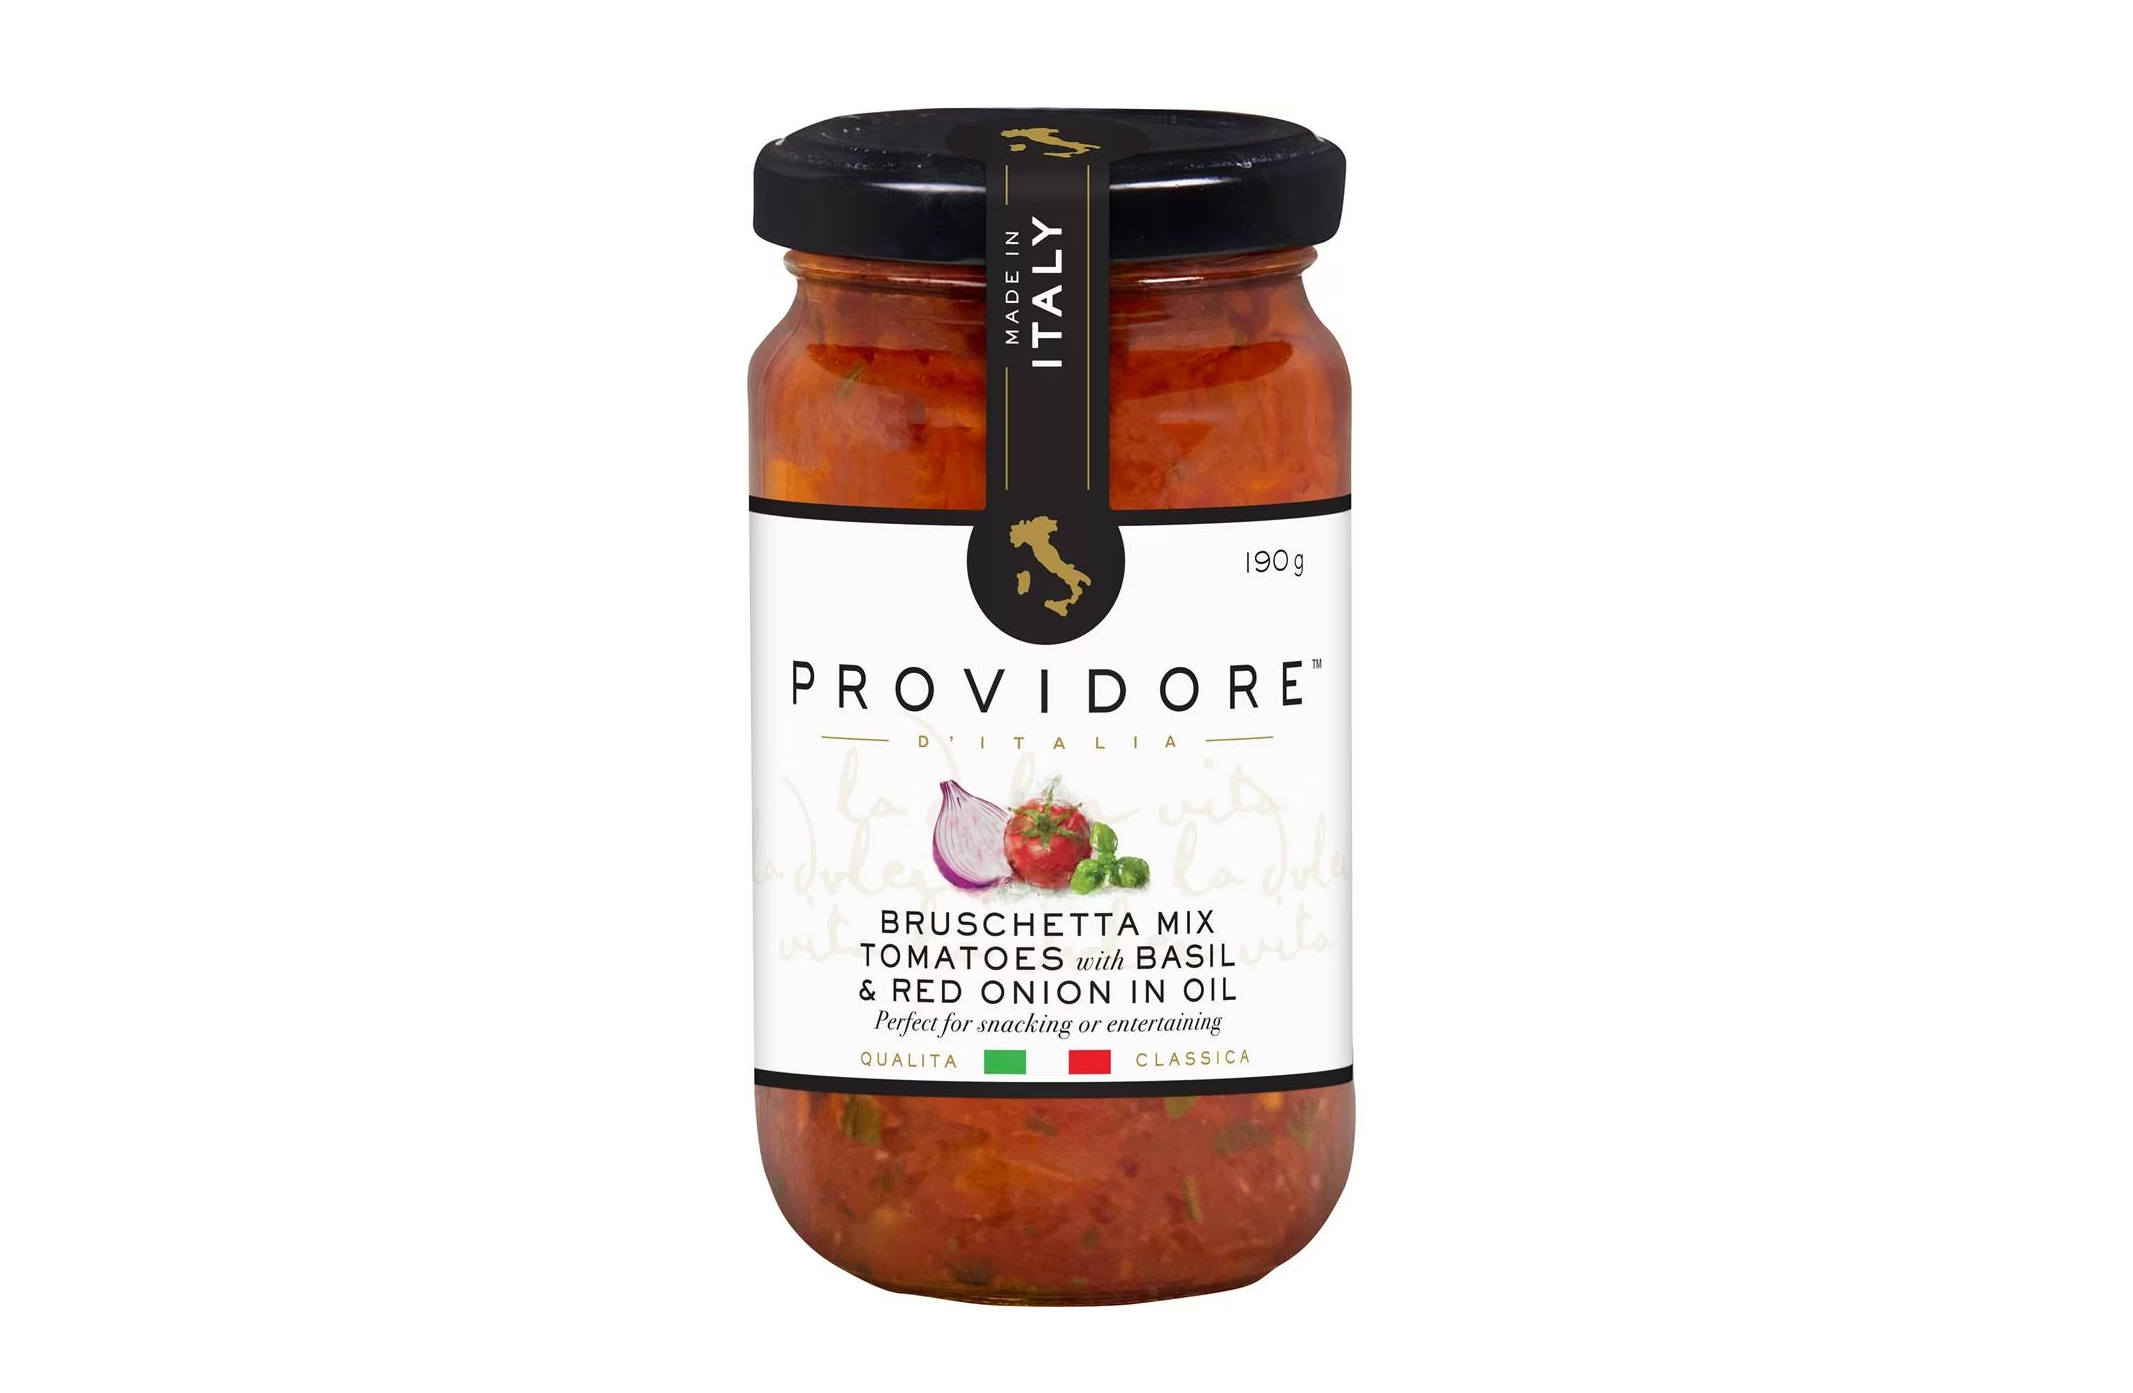 Providore Brushetta Mix Tomatoes With Basil & Red Onion In Oil 190g for $6.5 at Woolworths